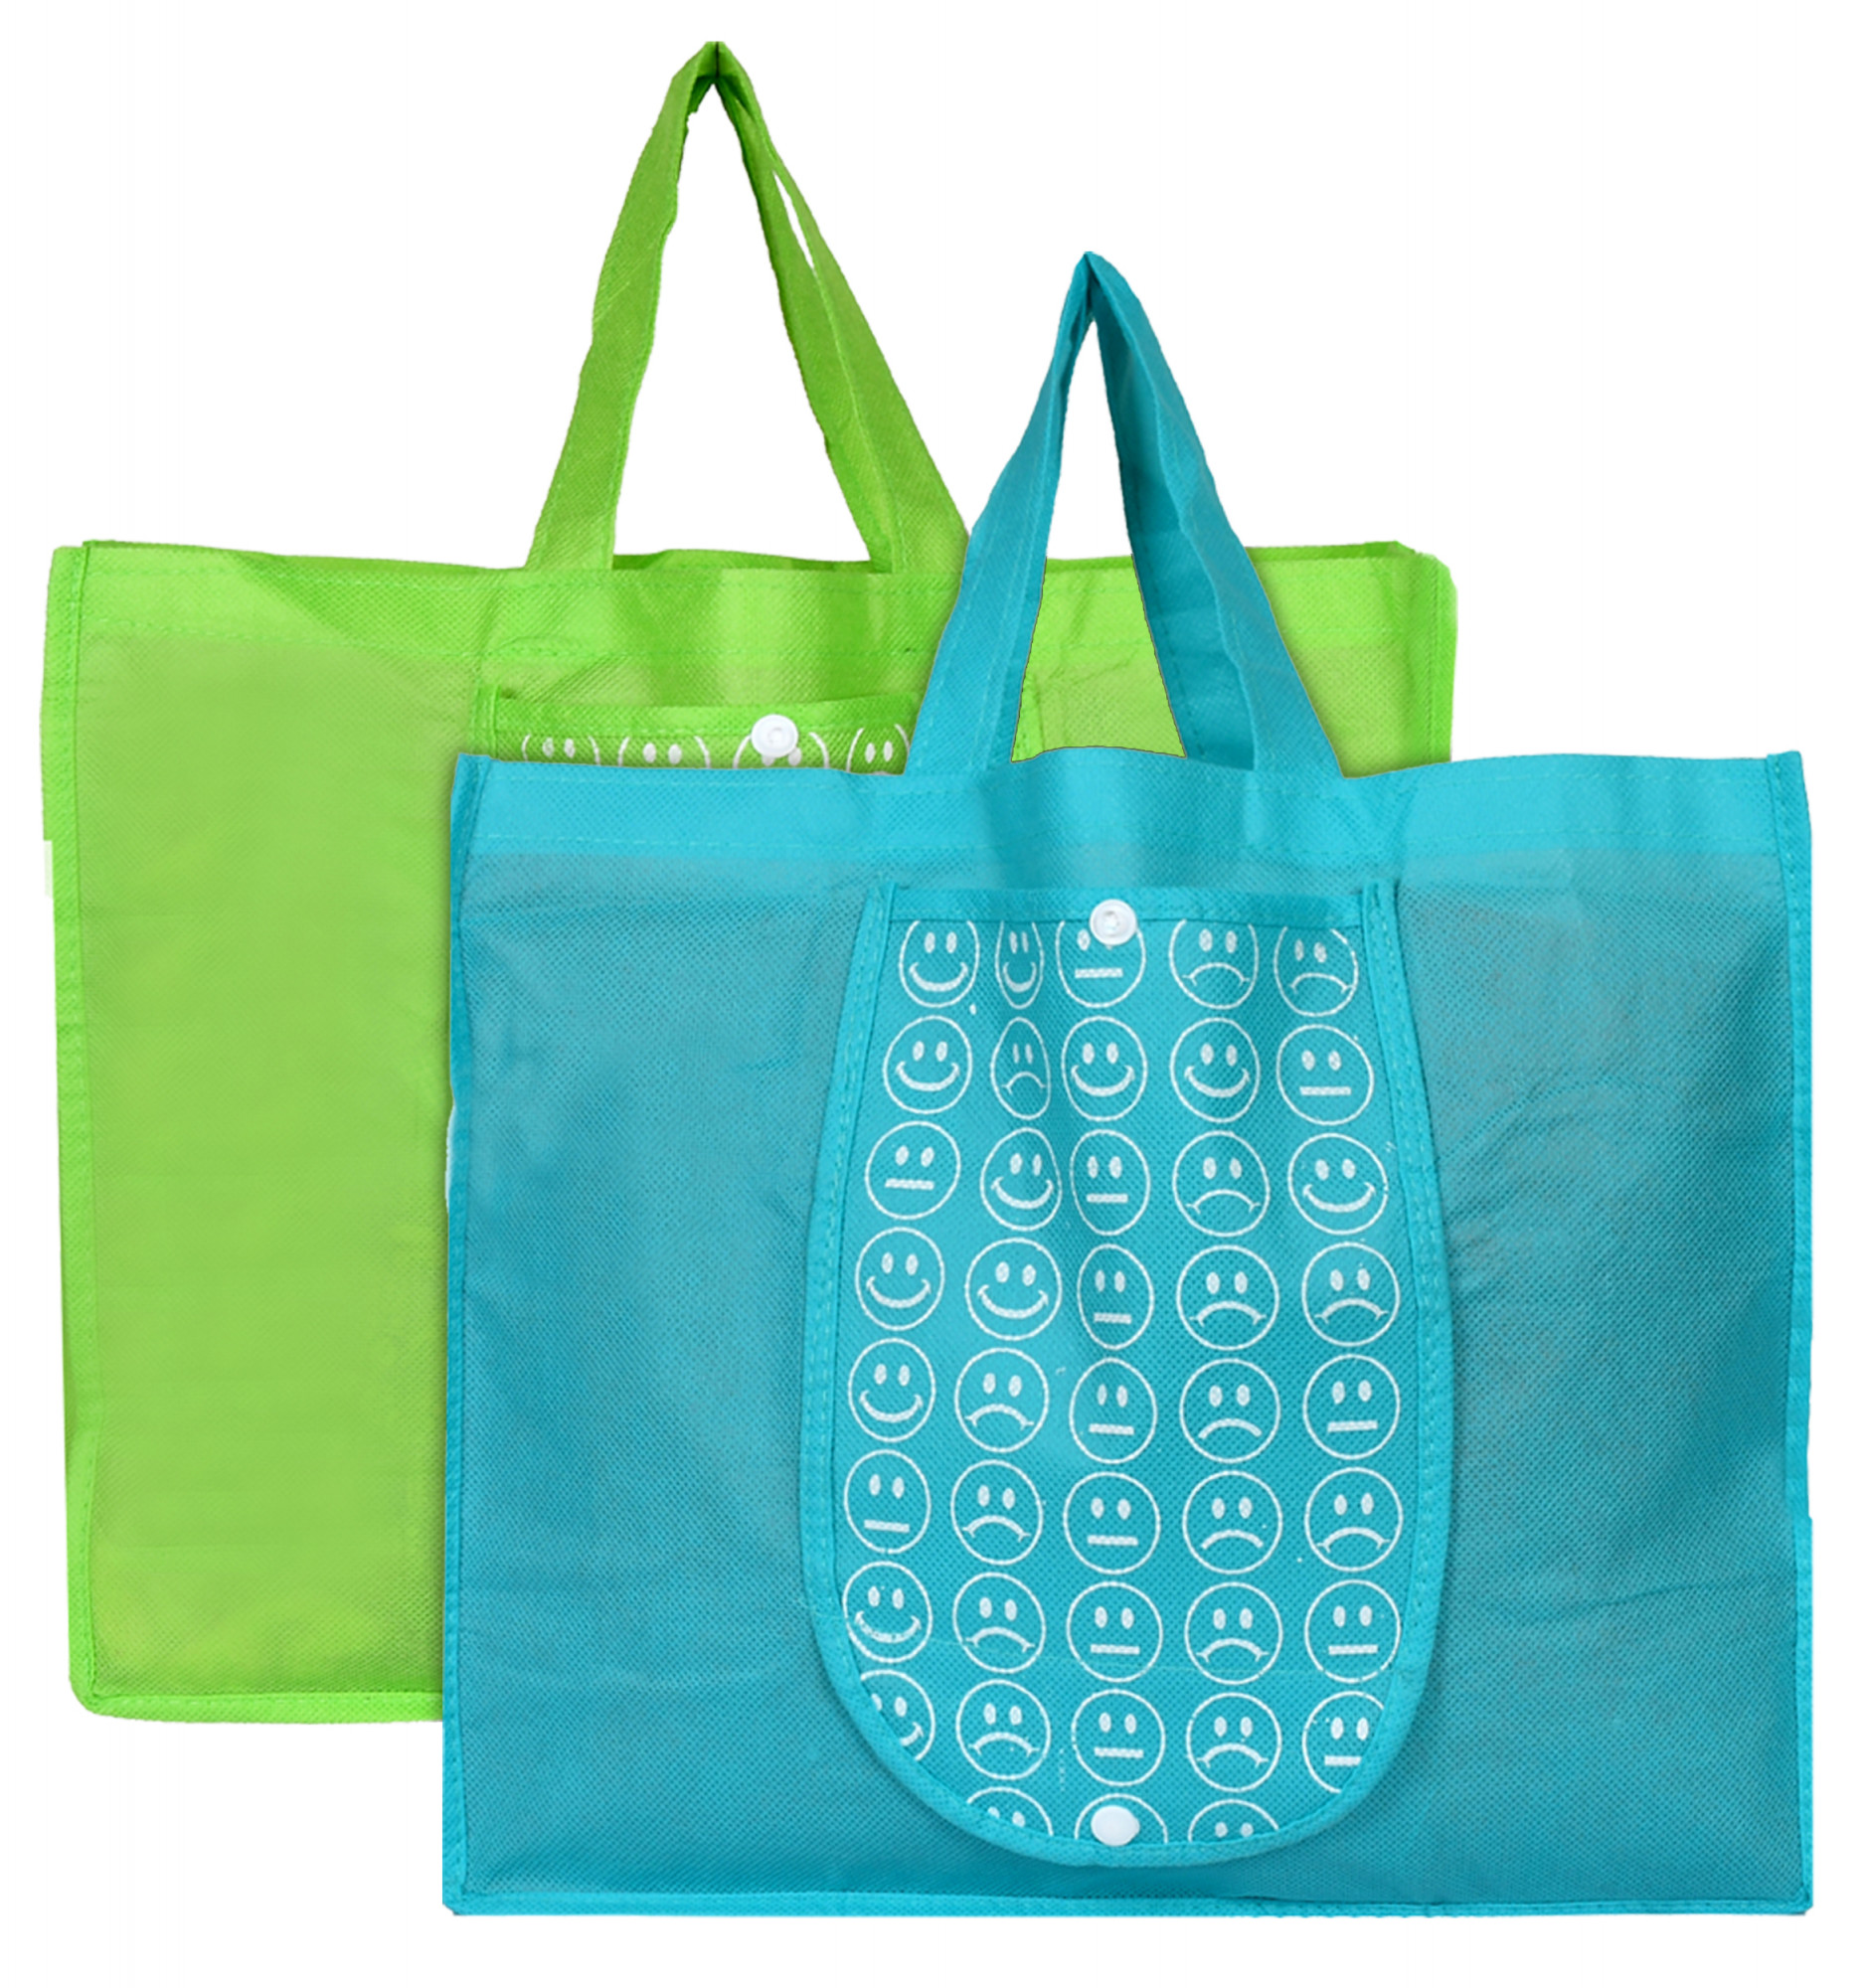 Kuber Industries Shopping Grocery Bags Foldable, Washable Grocery Tote Bag with One Small Pocket, Eco-Friendly Purse Bag Fits in Pocket Waterproof & Lightweight (Green & Blue)